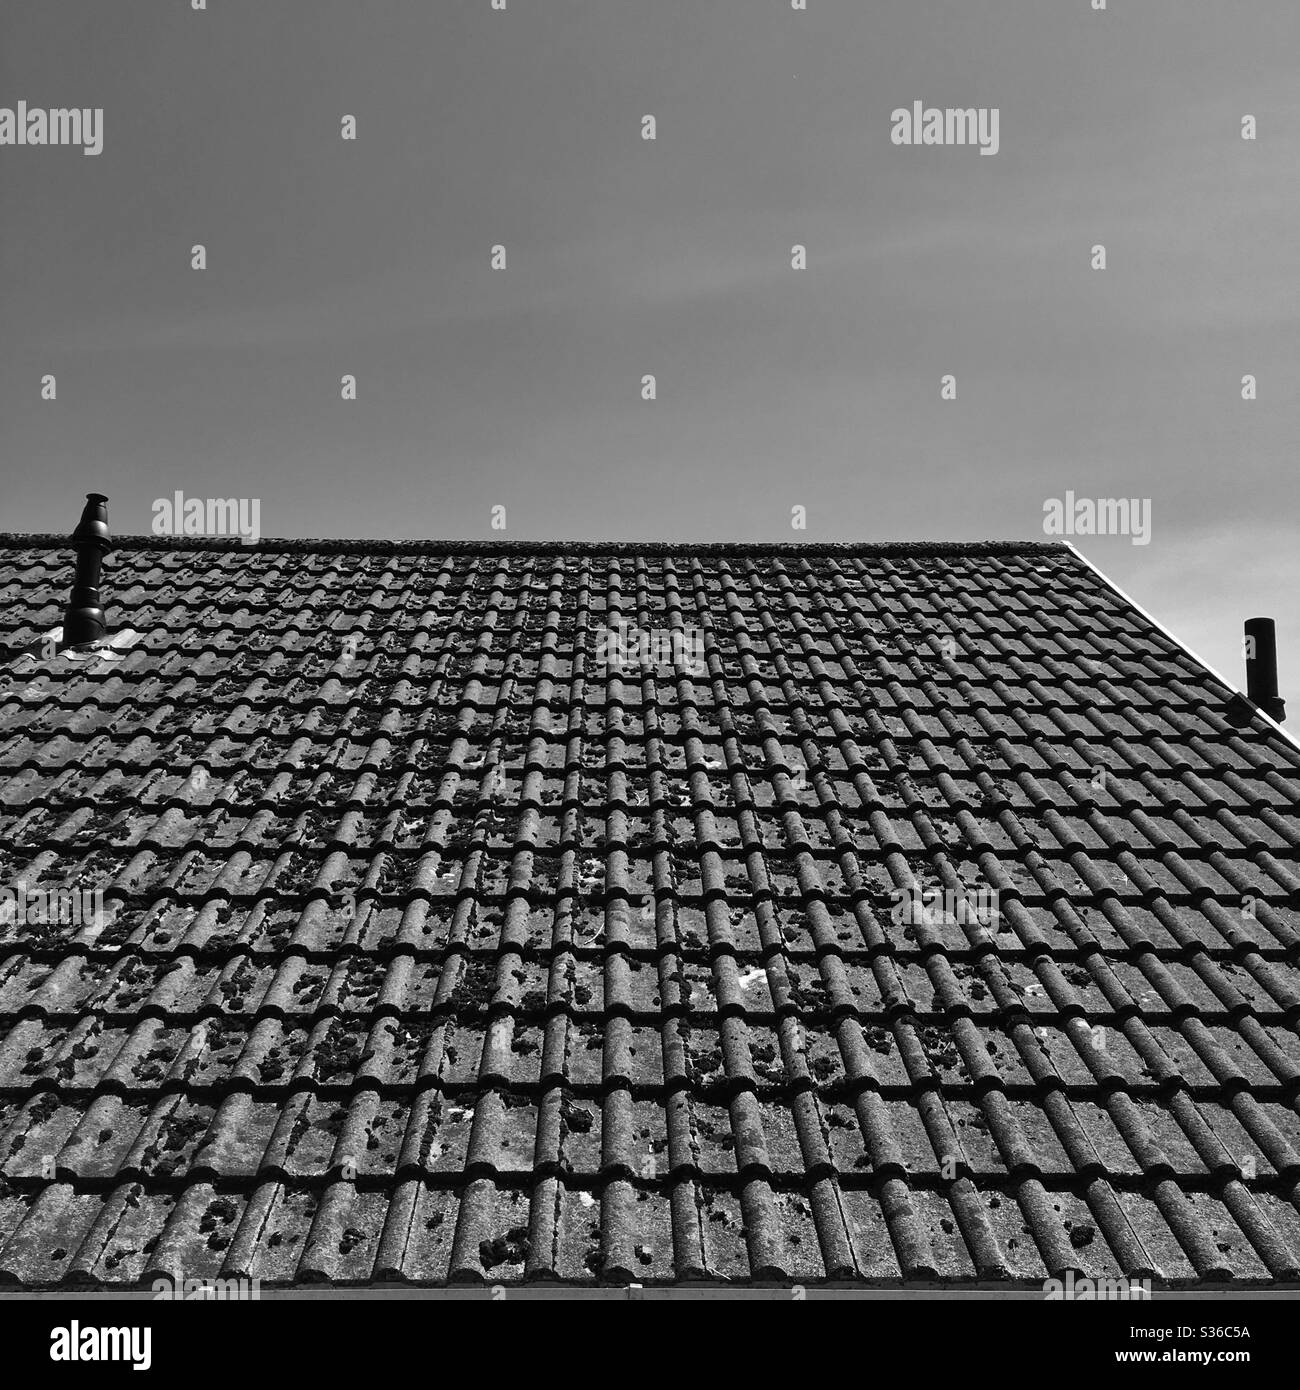 A black and white photograph of the roof of a bungalow property with chimneys. Moss balls on the roof. Old fashioned roofing tiles. Stock Photo